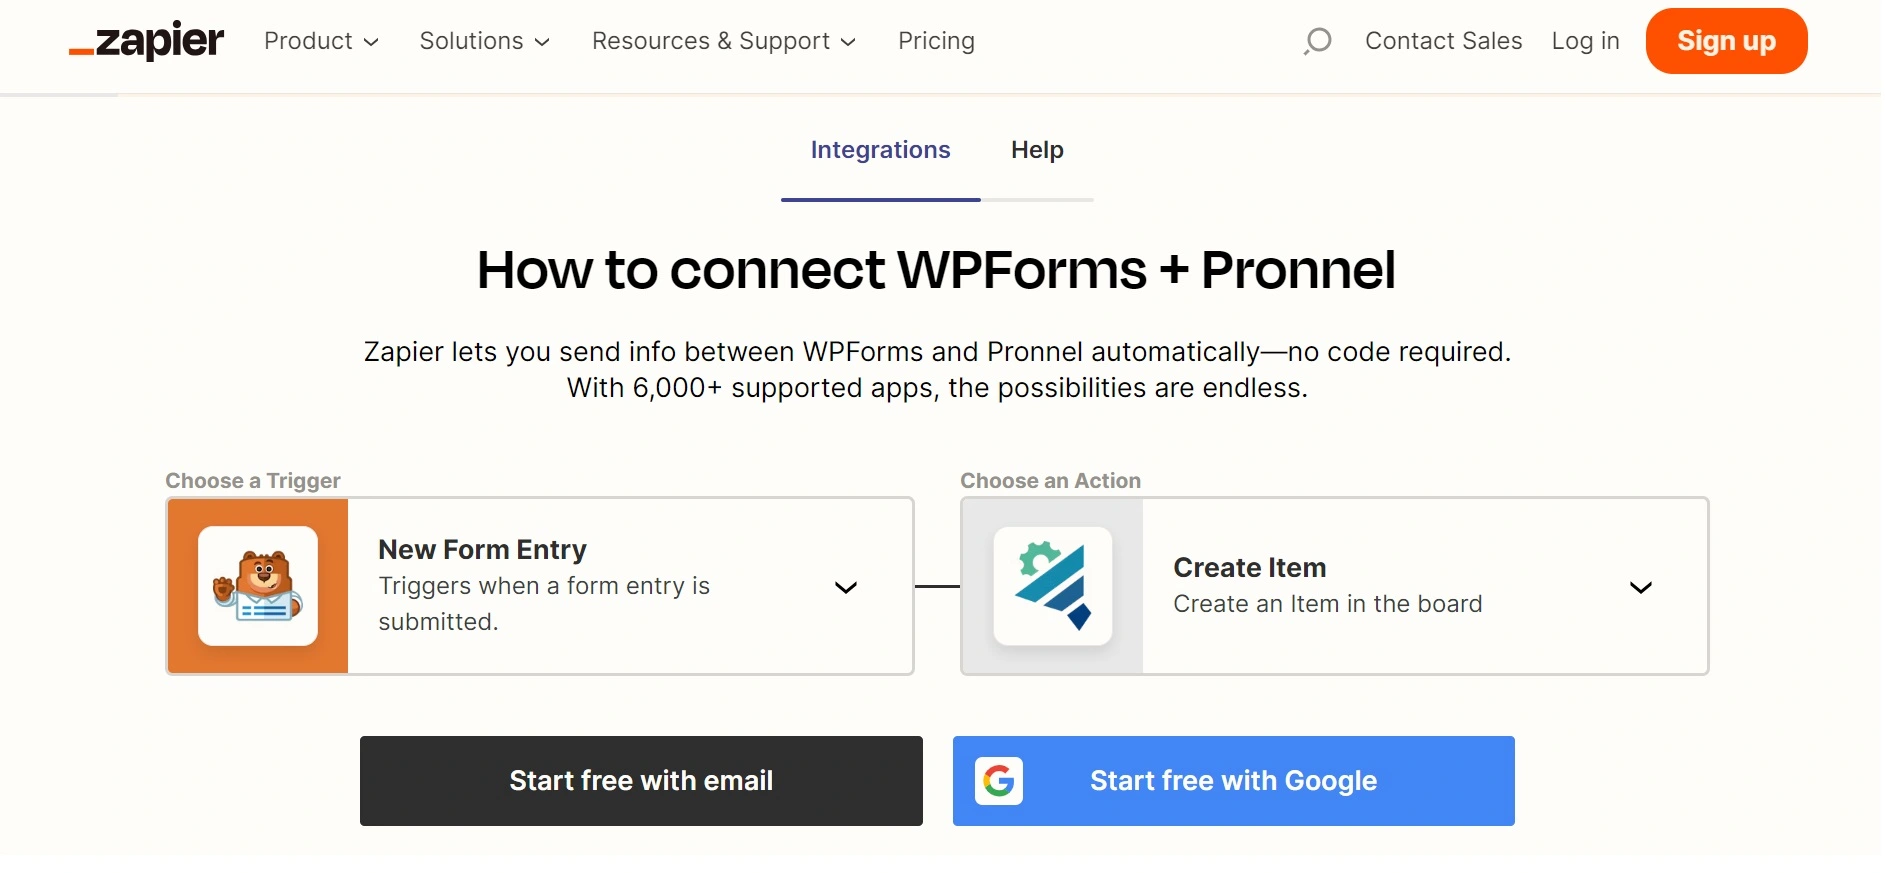 Single Click Integration of Your Wordpress websites forms with Pronnel CRM through Zapier.